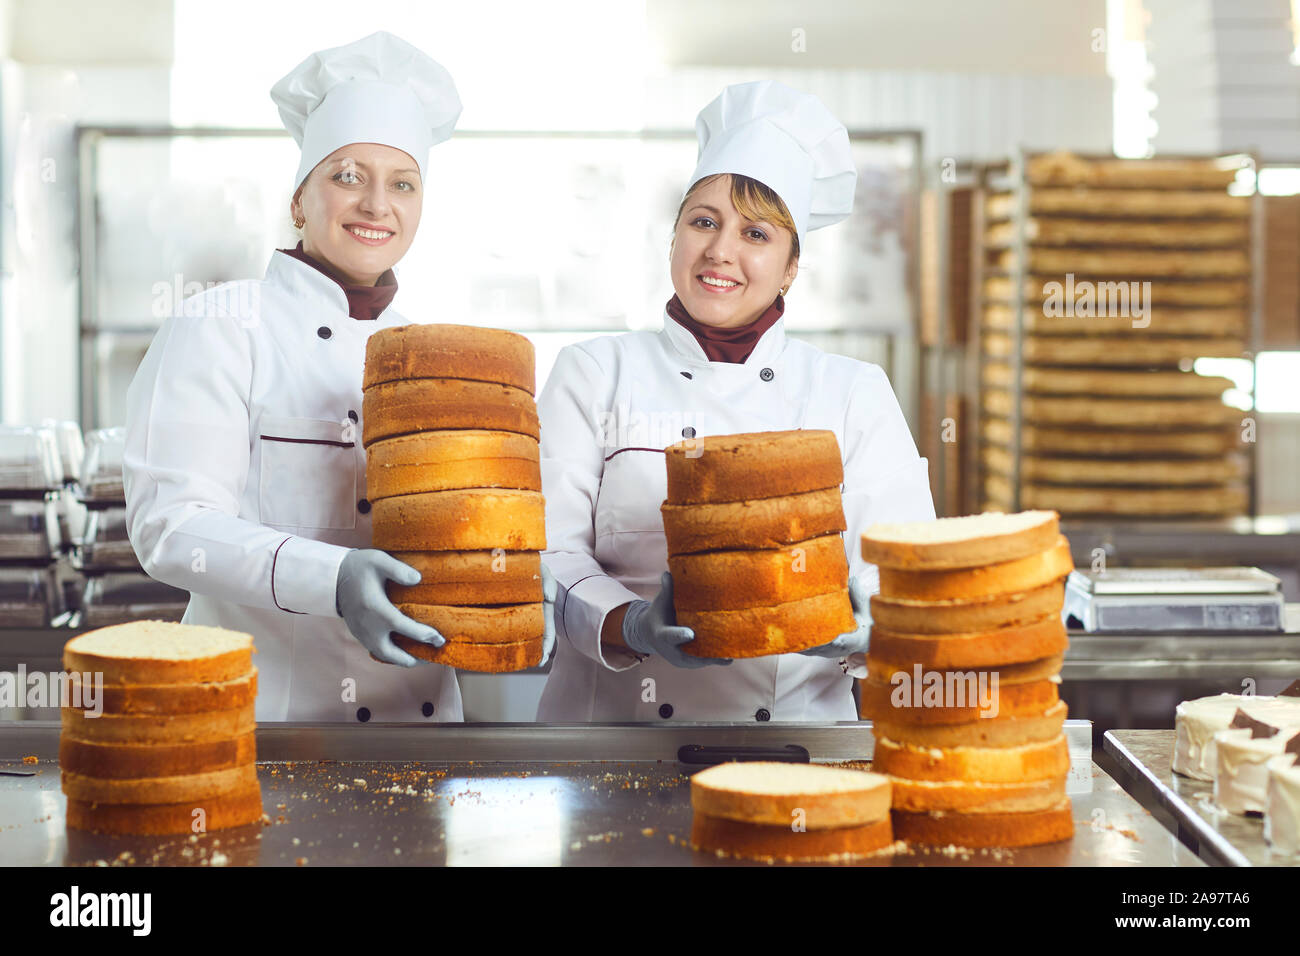 https://c8.alamy.com/comp/2A97TA6/pastry-chefs-hold-cakes-for-the-cake-in-their-hands-in-confectionery-2A97TA6.jpg